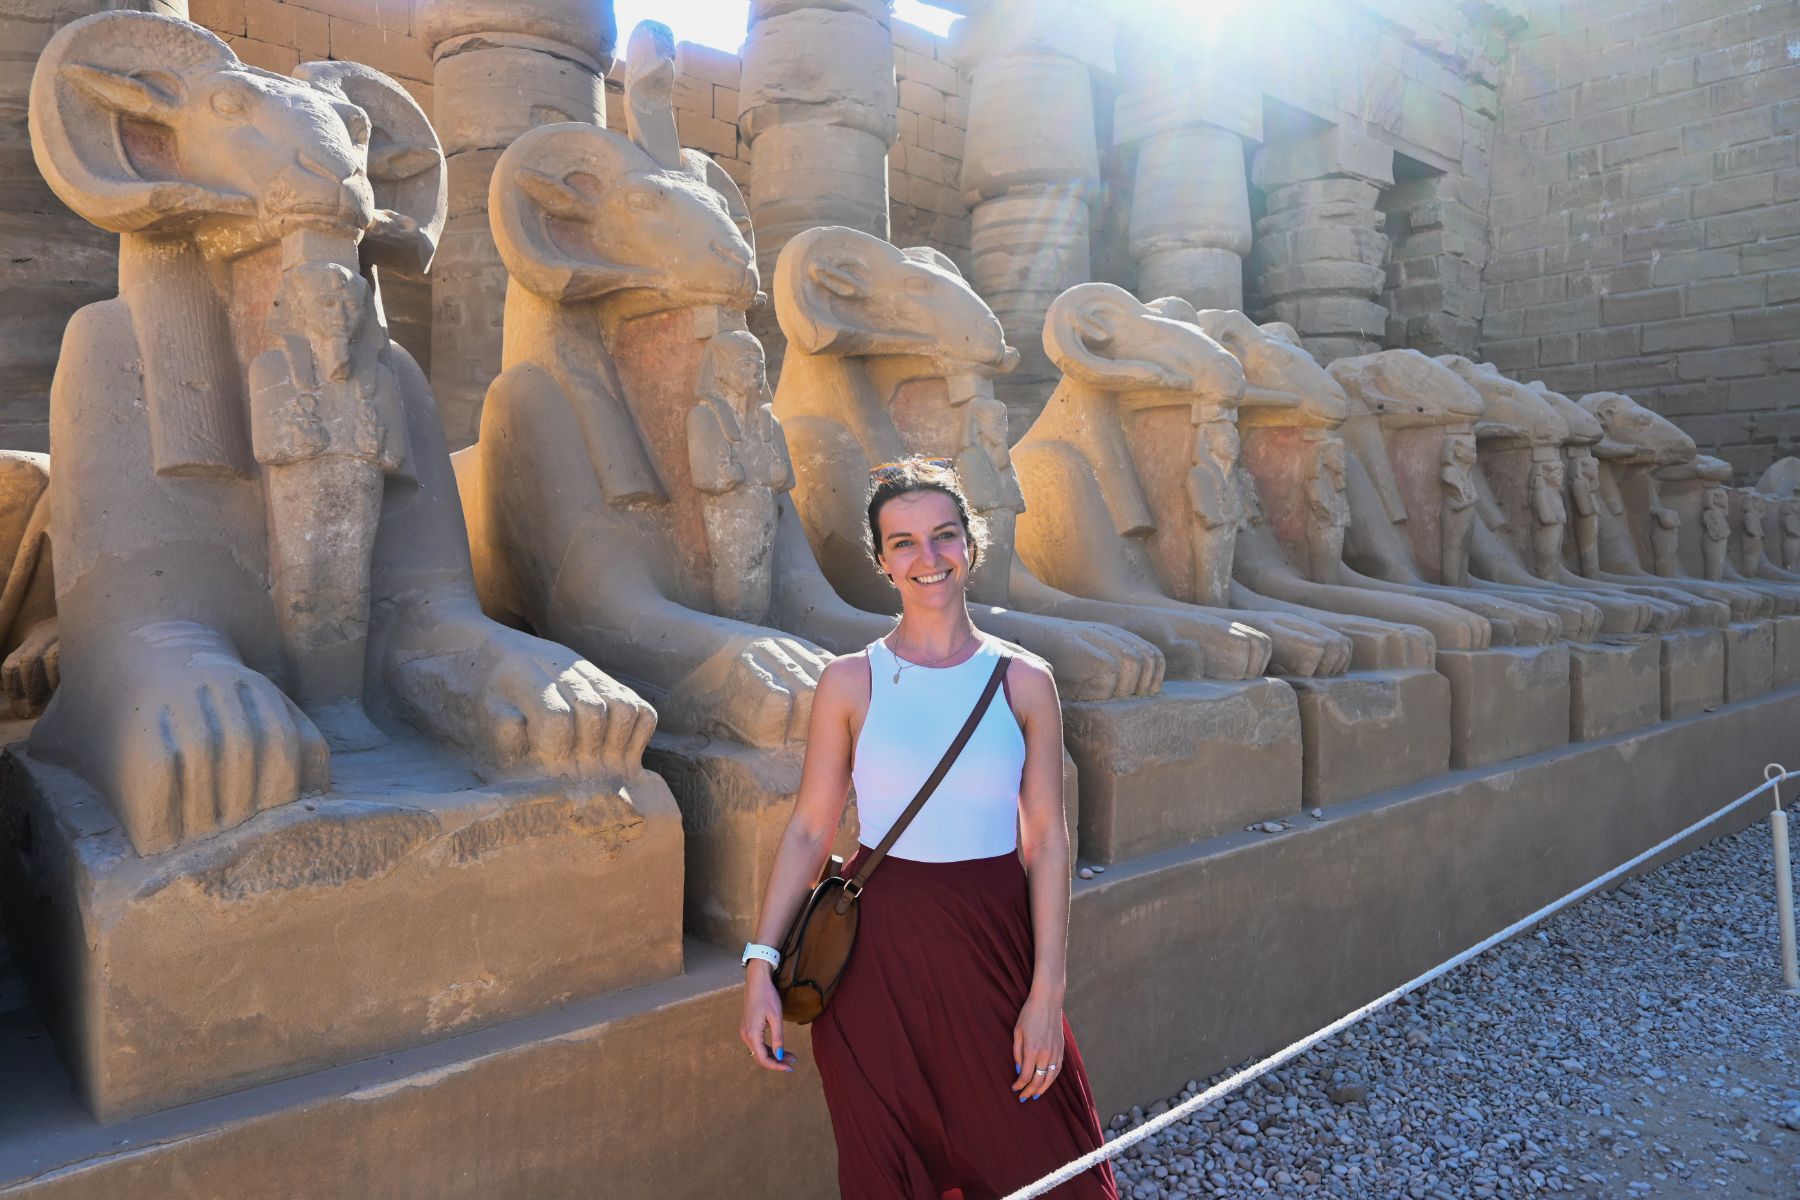 Red Savannah destination specialist Nora Berberich outside the Luxor Temple in Egypt